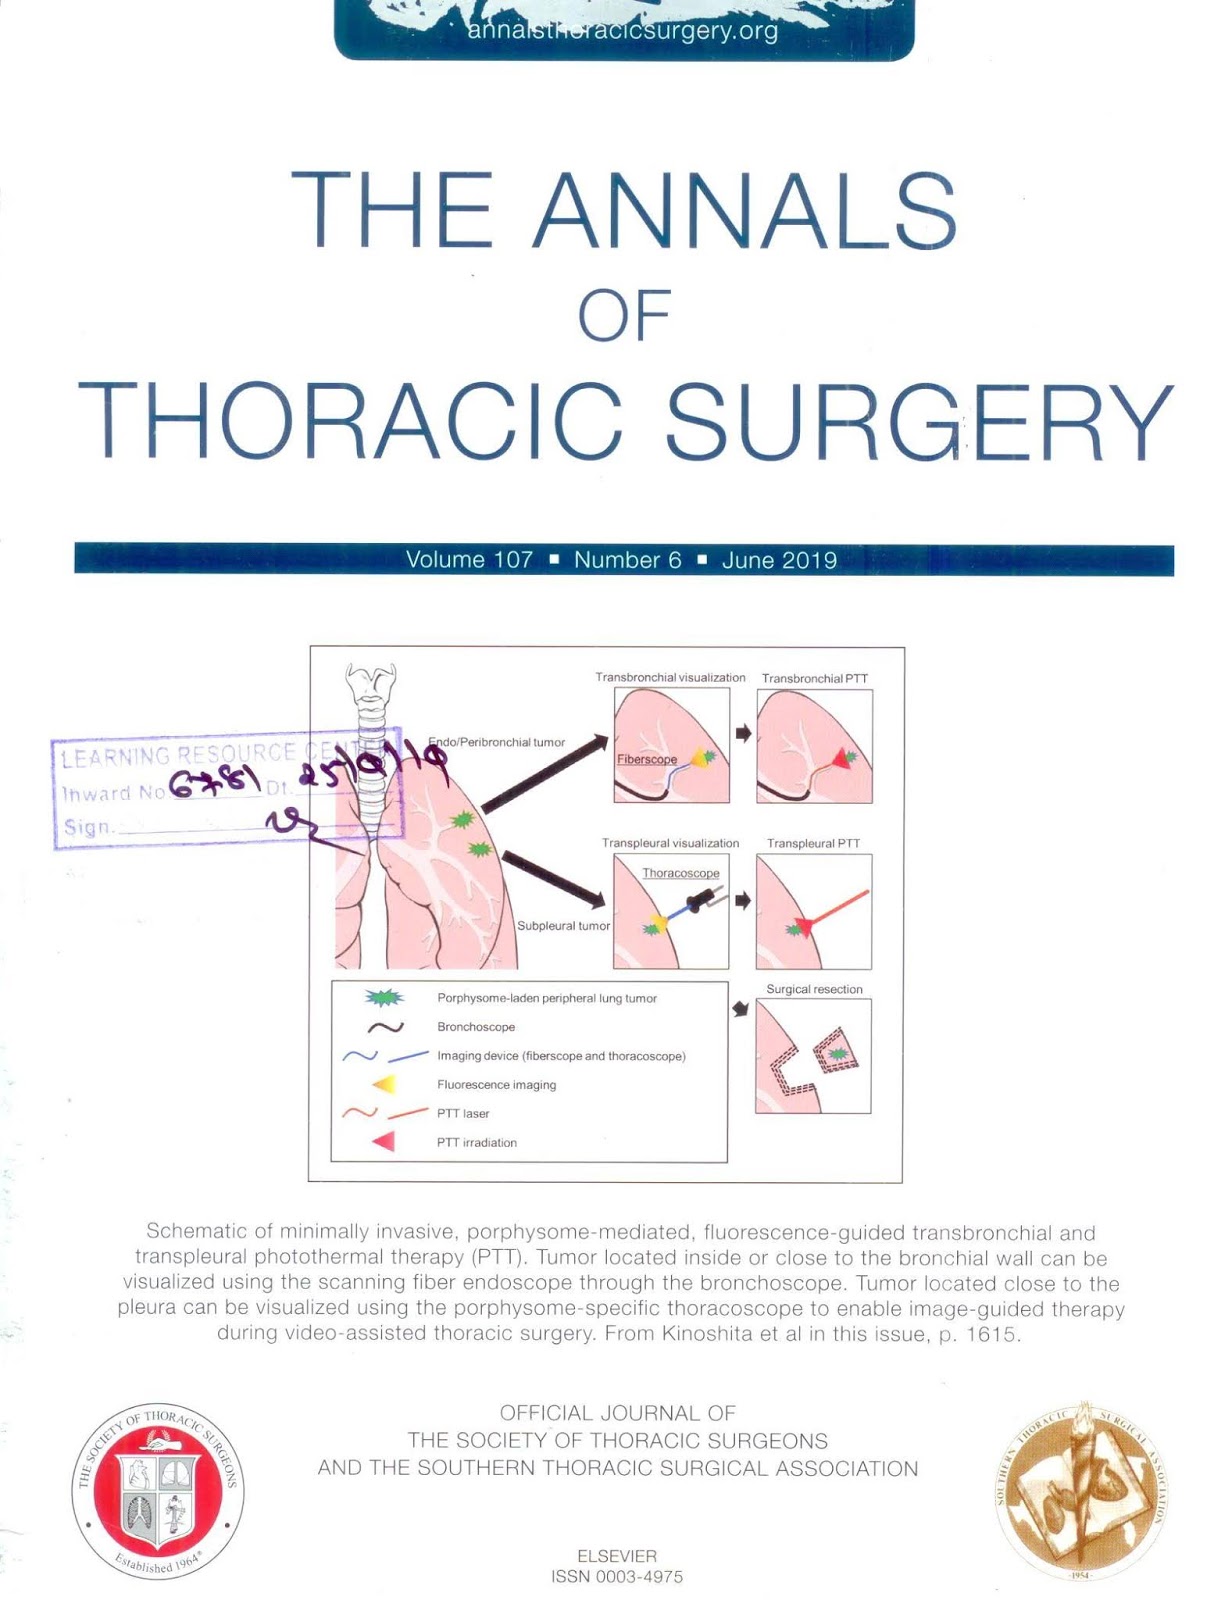 https://www.annalsthoracicsurgery.org/issue/S0003-4975(18)X0017-4